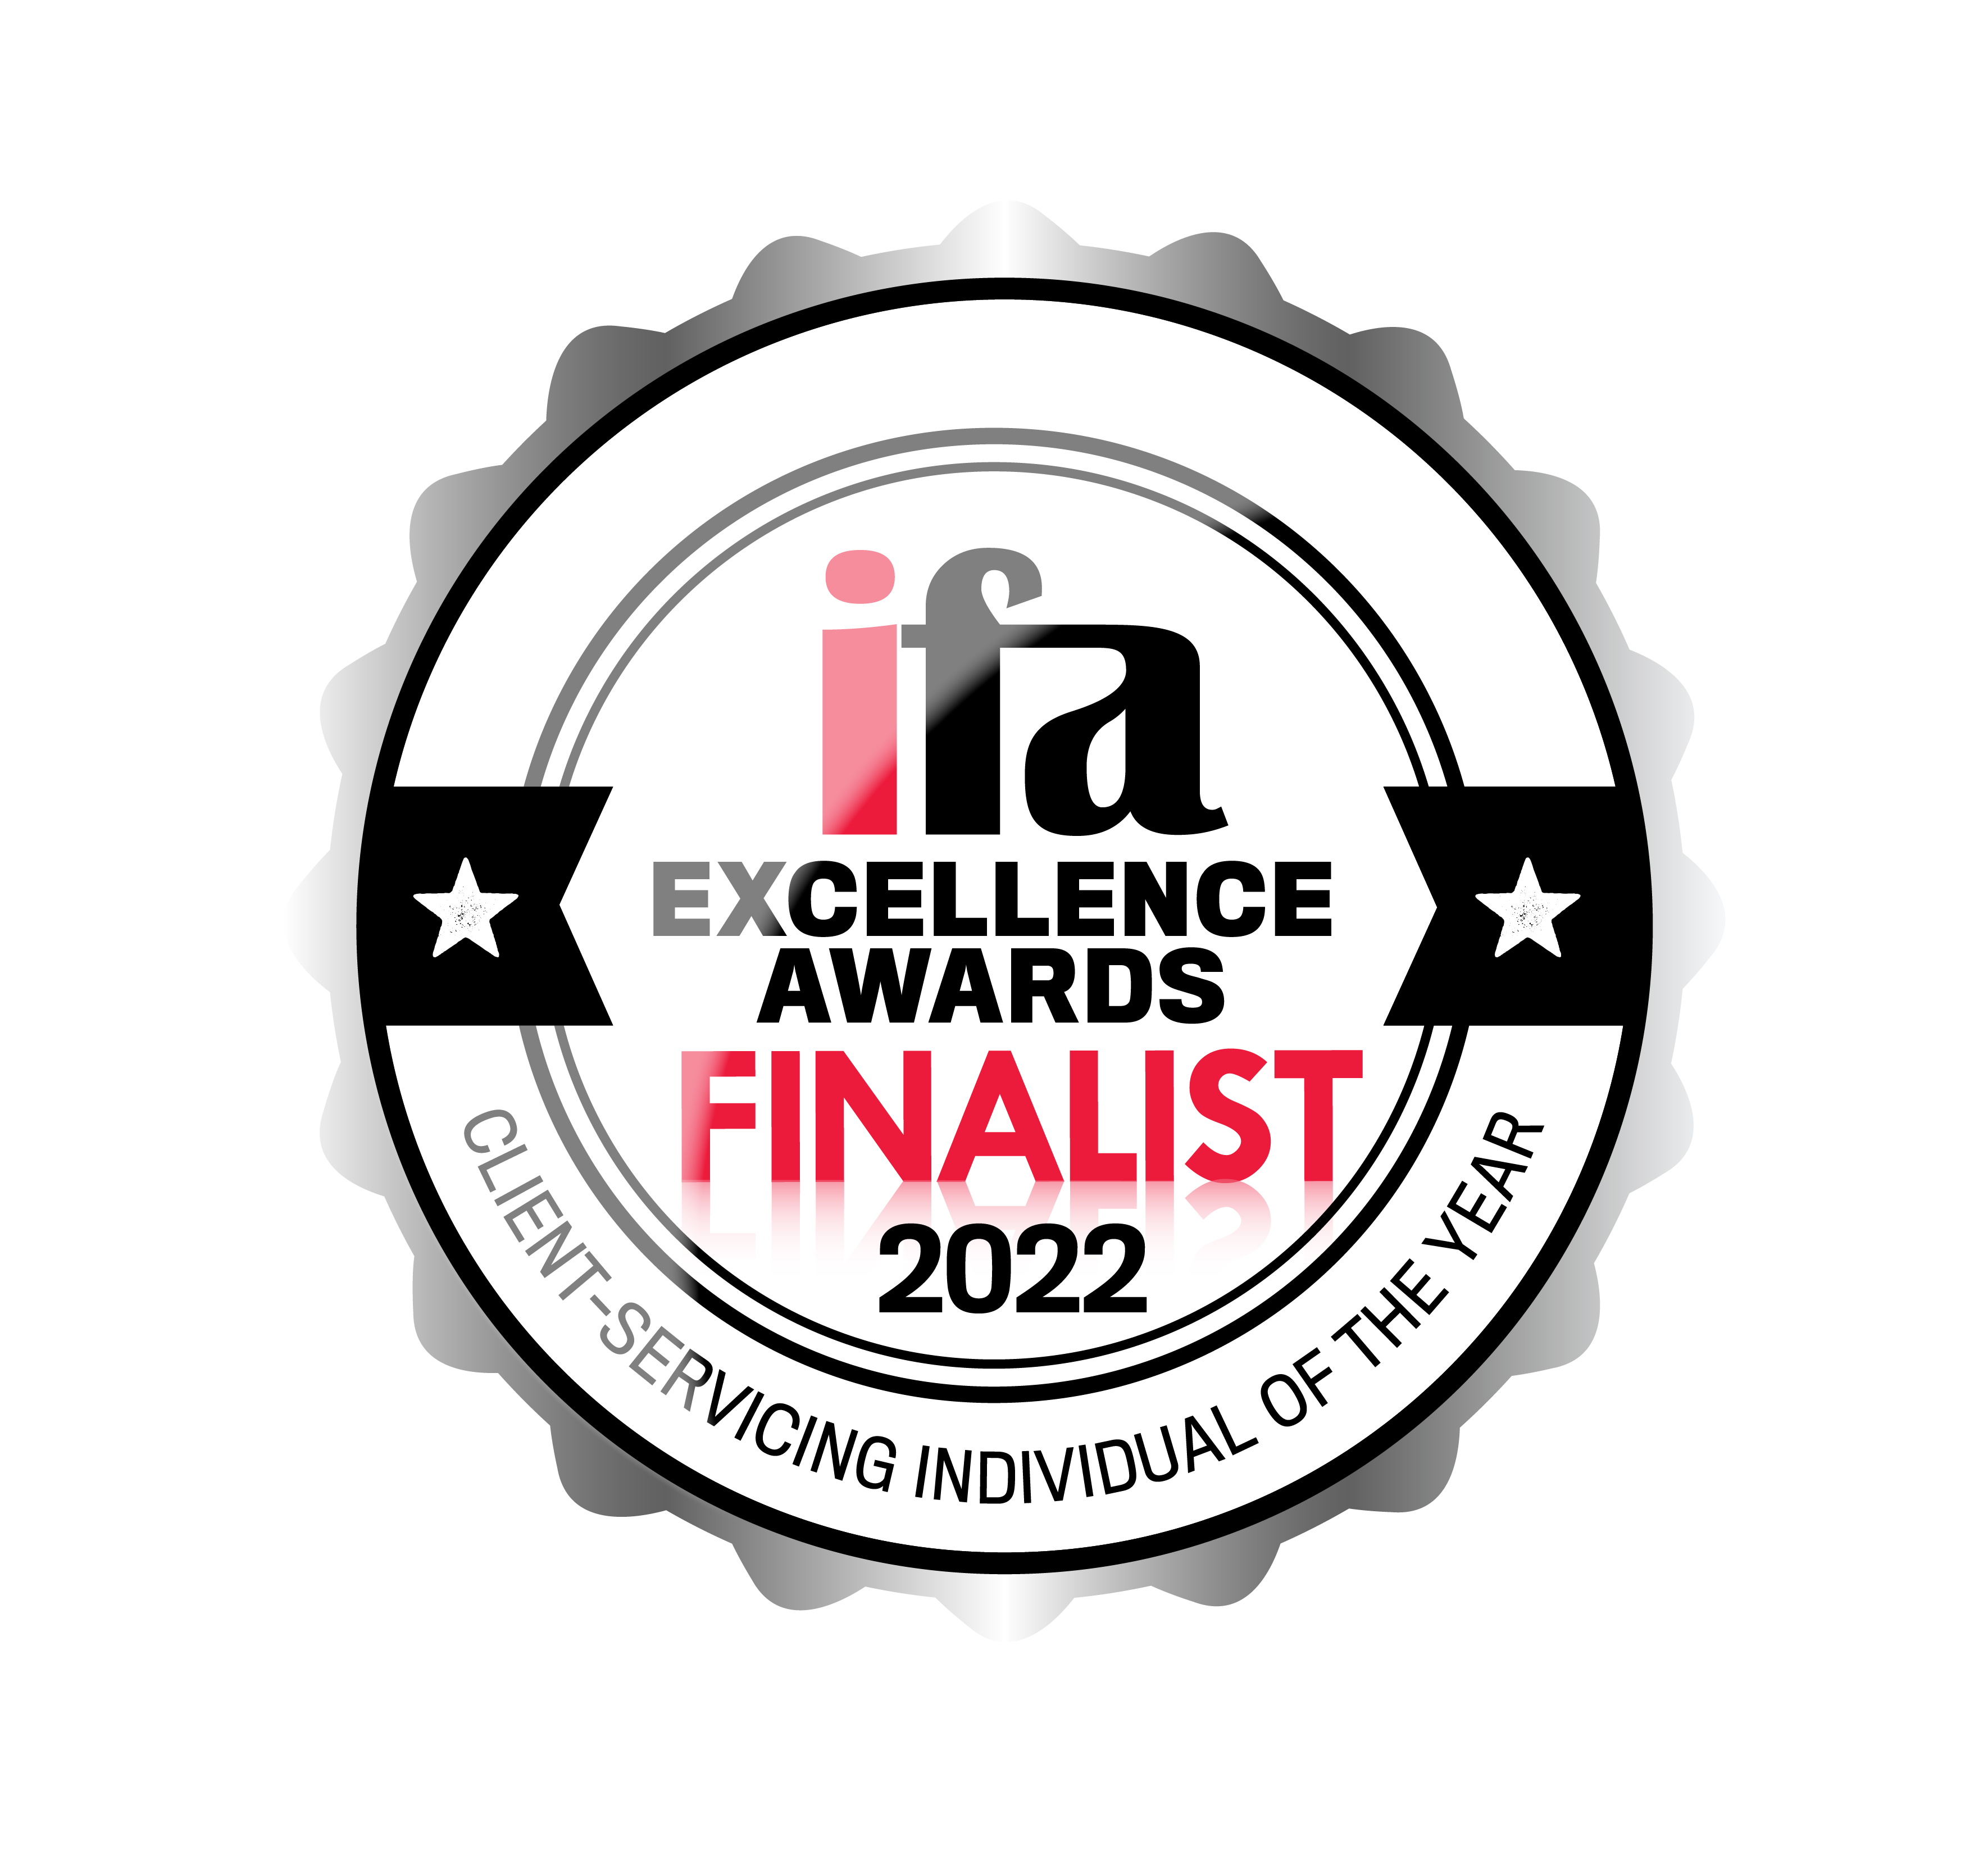 IFA SEAL finalists 2022 Client Servicing Individual of the Year